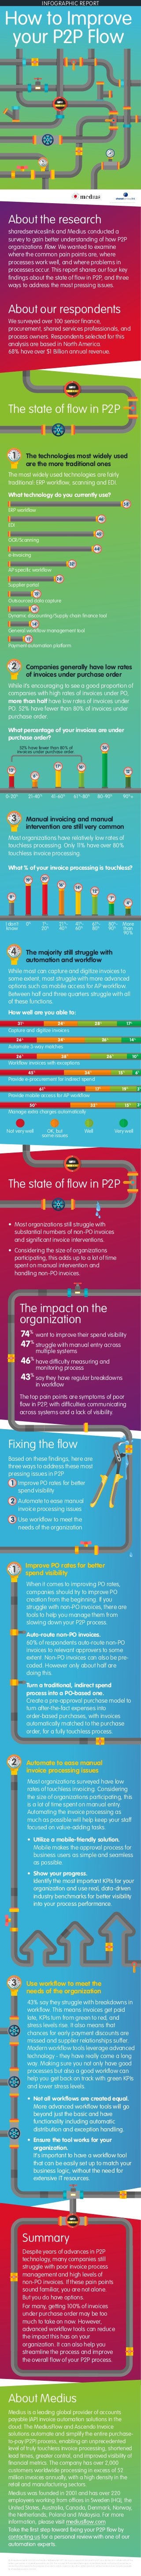 The state of flow in P2P
Fixing the flow
The impact on the
organization
41-60%
INFOGRAPHIC REPORT
© sharedserviceslink and Medius 2017
How to Improve
your P2P Flow
About the research
sharedserviceslink and Medius conducted a
survey to gain better understanding of how P2P
organizations flow. We wanted to examine
where the common pain points are, where
processes work well, and where problems in
processes occur. This report shares our four key
findings about the state of flow in P2P, and three
ways to address the most pressing issues.
About our respondents
We surveyed over 100 senior finance,
procurement, shared services professionals, and
process owners. Respondents selected for this
analysis are based in North America.
68% have over $1 Billion annual revenue.
The most widely used technologies are fairly
traditional: ERP workflow, scanning and EDI.
ERP workflow
EDI
OCR/Scanning
e-Invoicing
AP specific workflow
Supplier portal
Outsourced data capture
Capture and digitize invoices
Automate 3-way matches
Workflow invoices with exceptions
Provide e-procurement for indirect spend
Provide mobile access for AP workflow
Manage extra charges automatically
Not very well
Payment automation platform
0-20%
21-40%
61%
-80%
80-90%
90%
+
The state of flow in P2P
The technologies most widely used
are the more traditional ones
What technology do you currently use?
1
While it’s encouraging to see a good proportion of
companies with high rates of invoices under PO,
more than half have low rates of invoices under
PO. 52% have fewer than 80% of invoices under
purchase order.
Companies generally have low rates
of invoices under purchase order
What percentage of your invoices are under
purchase order?
52% have fewer than 80% of
invoices under purchase order.
2
Most organizations have relatively low rates of
touchless processing. Only 11% have over 80%
touchless invoice processing.
Manual invoicing and manual
intervention are still very common
What % of your invoice processing is touchless?
3
Based on these findings, here are
three ways to address these most
pressing issues in P2P
Improve PO rates for better
spend visibility
Automate to ease manual
invoice processing issues
Use workflow to meet the
needs of the organization
Summary
74%
want to improve their spend visibility
47%
struggle with manual entry across
multiple systems
46%
have difficulty measuring and
monitoring process
43%
say they have regular breakdowns
in workflow
The top pain points are symptoms of poor
flow in P2P, with difficulties communicating
across systems and a lack of visibility.
• Most organizations still struggle with
substantial numbers of non-PO invoices
and significant invoice interventions.
• Considering the size of organizations
participating, this adds up to a lot of time
spent on manual intervention and
handling non-PO invoices.
The majority still struggle with
automation and workflow
While most can capture and digitize invoices to
some extent, most struggle with more advanced
options such as mobile access for AP workflow.
Between half and three quarters struggle with all
of these functions.
How well are you able to:
4
Improve PO rates for better
spend visibility
When it comes to improving PO rates,
companies should try to improve PO
creation from the beginning. If you
struggle with non-PO invoices, there are
tools to help you manage them from
slowing down your P2P process.
Auto-route non-PO invoices.
60% of respondents auto-route non-PO
invoices to relevant approvers to some
extent. Non-PO invoices can also be pre-
coded. However only about half are
doing this.
Turn a traditional, indirect spend
process into a PO-based one.
Create a pre-approval purchase model to
turn after-the-fact expenses into
order-based purchases, with invoices
automatically matched to the purchase
order, for a fully touchless process.
1
58%
46%
45%
44%
32%
26%
15%
14%
Dynamic discounting/Supply chain finance tool
14%
General workflow management tool
11%
36%
12%
16%17%
13%
6%
1%
-
20%
I don't
know
0%
21%
-
40%
41%
-
60%
61%
-
80%
80%
-
90%
More
than
90%
14%
7%
12%
4%
16%
20%
8%
19%
OK, but
some issues
Well Very well
17%
31%
24%
28%
14%
26%
34%
26%
10%
26%
38%
26%
6%
45%
34%
15%
50%
32%
15%
3%
3%
61%
17%
19%
• Utilize a mobile-friendly solution.
Mobile makes the approval process for
business users as simple and seamless
as possible.
• Show your progress.
Identify the most important KPIs for your
organization and use real, data-driven
industry benchmarks for better visibility
into your process performance.
Automate to ease manual
invoice processing issues
Most organizations surveyed have low
rates of touchless invoicing. Considering
the size of organizations participating, this
is a lot of time spent on manual entry.
Automating the invoice processing as
much as possible will help keep your staff
focused on value-adding tasks.
2
43% say they struggle with breakdowns in
workflow. This means invoices get paid
late, KPIs turn from green to red, and
stress levels rise. It also means that
chances for early payment discounts are
missed and supplier relationships suffer.
Modern workflow tools leverage advanced
technology - they have really come a long
way. Making sure you not only have good
processes but also a good workflow can
help you get back on track with green KPIs
and lower stress levels.
• Not all workflows are created equal.
More advanced workflow tools will go
beyond just the basic and have
functionality including automatic
distribution and exception handling.
• Ensure the tool works for your
organization.
It's important to have a workflow tool
that can be easily set up to match your
business logic, without the need for
extensive IT resources.
Use workflow to meet the
needs of the organization
3
1
2
3
Despite years of advances in P2P
technology, many companies still
struggle with poor invoice process
management and high levels of
non-PO invoices. If these pain points
sound familiar, you are not alone.
But you do have options.
For many, getting 100% of invoices
under purchase order may be too
much to take on now. However,
advanced workflow tools can reduce
the impact this has on your
organization. It can also help you
streamline the process and improve
the overall flow of your P2P process.
About Medius
Medius is a leading global provider of accounts
payable (AP) invoice automation solutions in the
cloud. The MediusFlow and Ascendo Invoice
solutions automate and simplify the entire purchase-
to-pay (P2P) process, enabling an unprecedented
level of truly touchless invoice processing, shortened
lead times, greater control, and improved visibility of
financial metrics. The company has over 2,000
customers worldwide processing in excess of 52
million invoices annually, with a high density in the
retail and manufacturing sectors.
Medius was founded in 2001 and has over 220
employees working from offices in Sweden (HQ), the
United States, Australia, Canada, Denmark, Norway,
the Netherlands, Poland and Malaysia. For more
information, please visit mediusflow.com
Take the first step toward fixing your P2P flow by
contacting us for a personal review with one of our
automation experts.
© sharedserviceslink.com Ltd and Medius Software Inc 2017. No copy or visual can be used in part, as a phrase or in whole without the
written permission of sharedserviceslink.com Ltd. The concept of this product belongs to sharedserviceslink.com Ltd and cannot be re-
created by a third party for the purpose of an event, article, report or any other written product, without written consent made available
by sharedserviceslink.com Ltd.
 